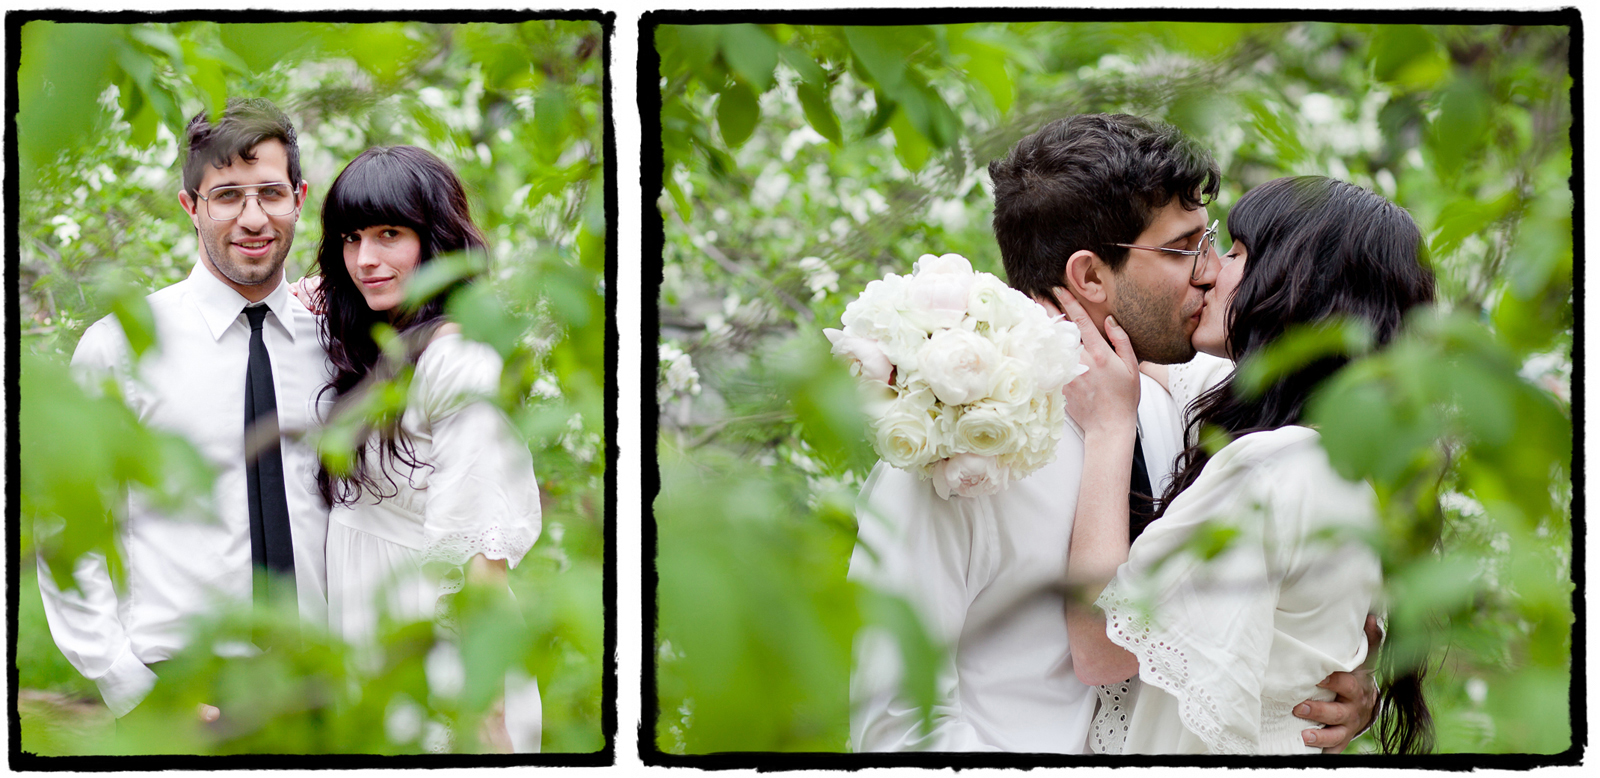 Mookie & Lisa were married at City Hall in Manhattan.  I took these photos of them in the little tiny park across the street from the entrance to the city clerk's building.